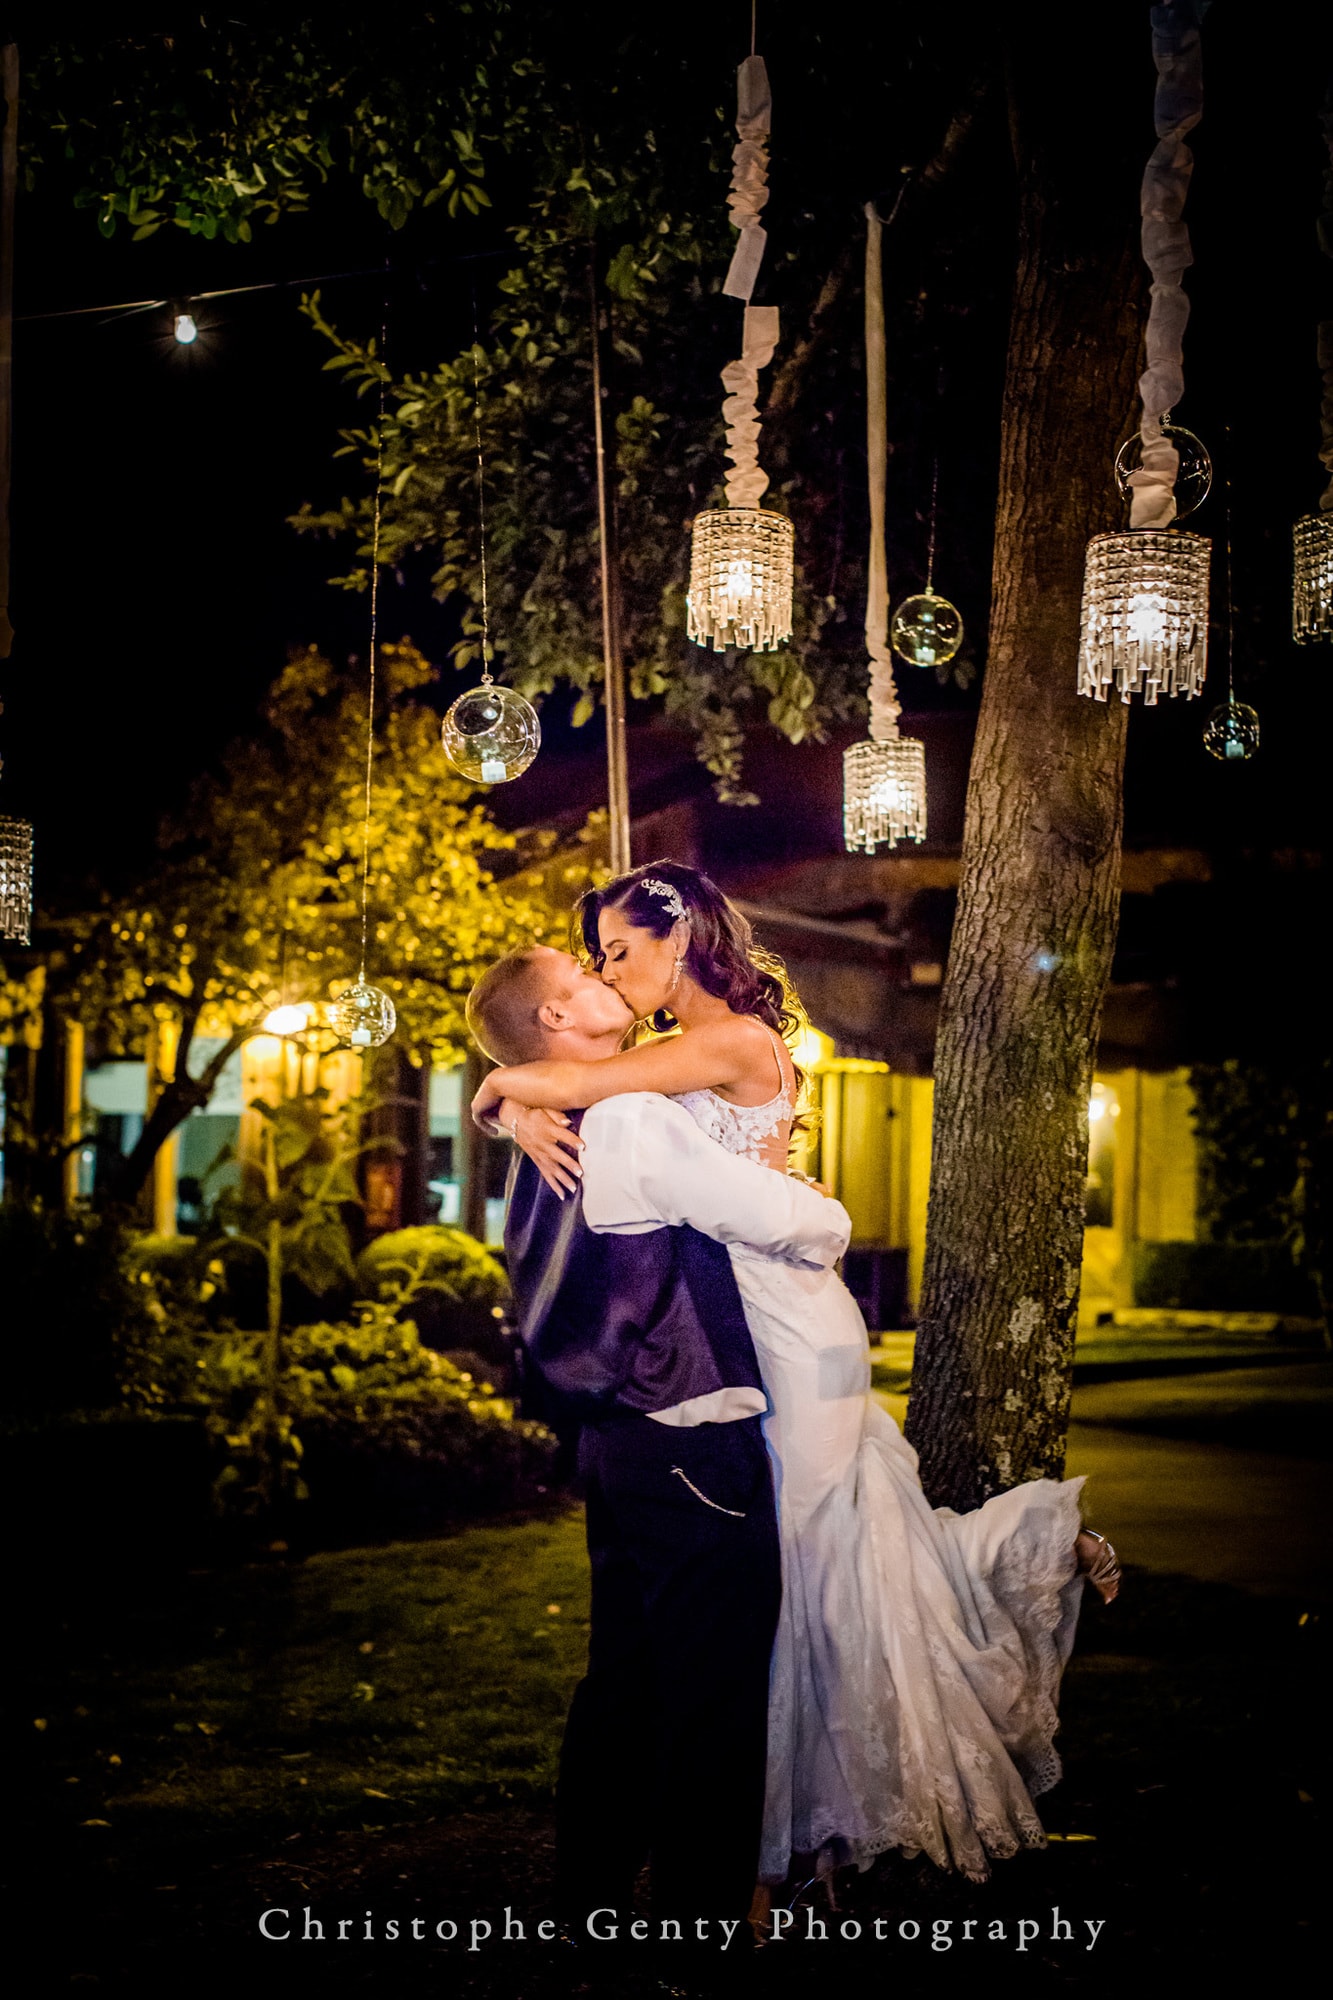 Wedding Photography at The Villagio Inn in Yountville, CA